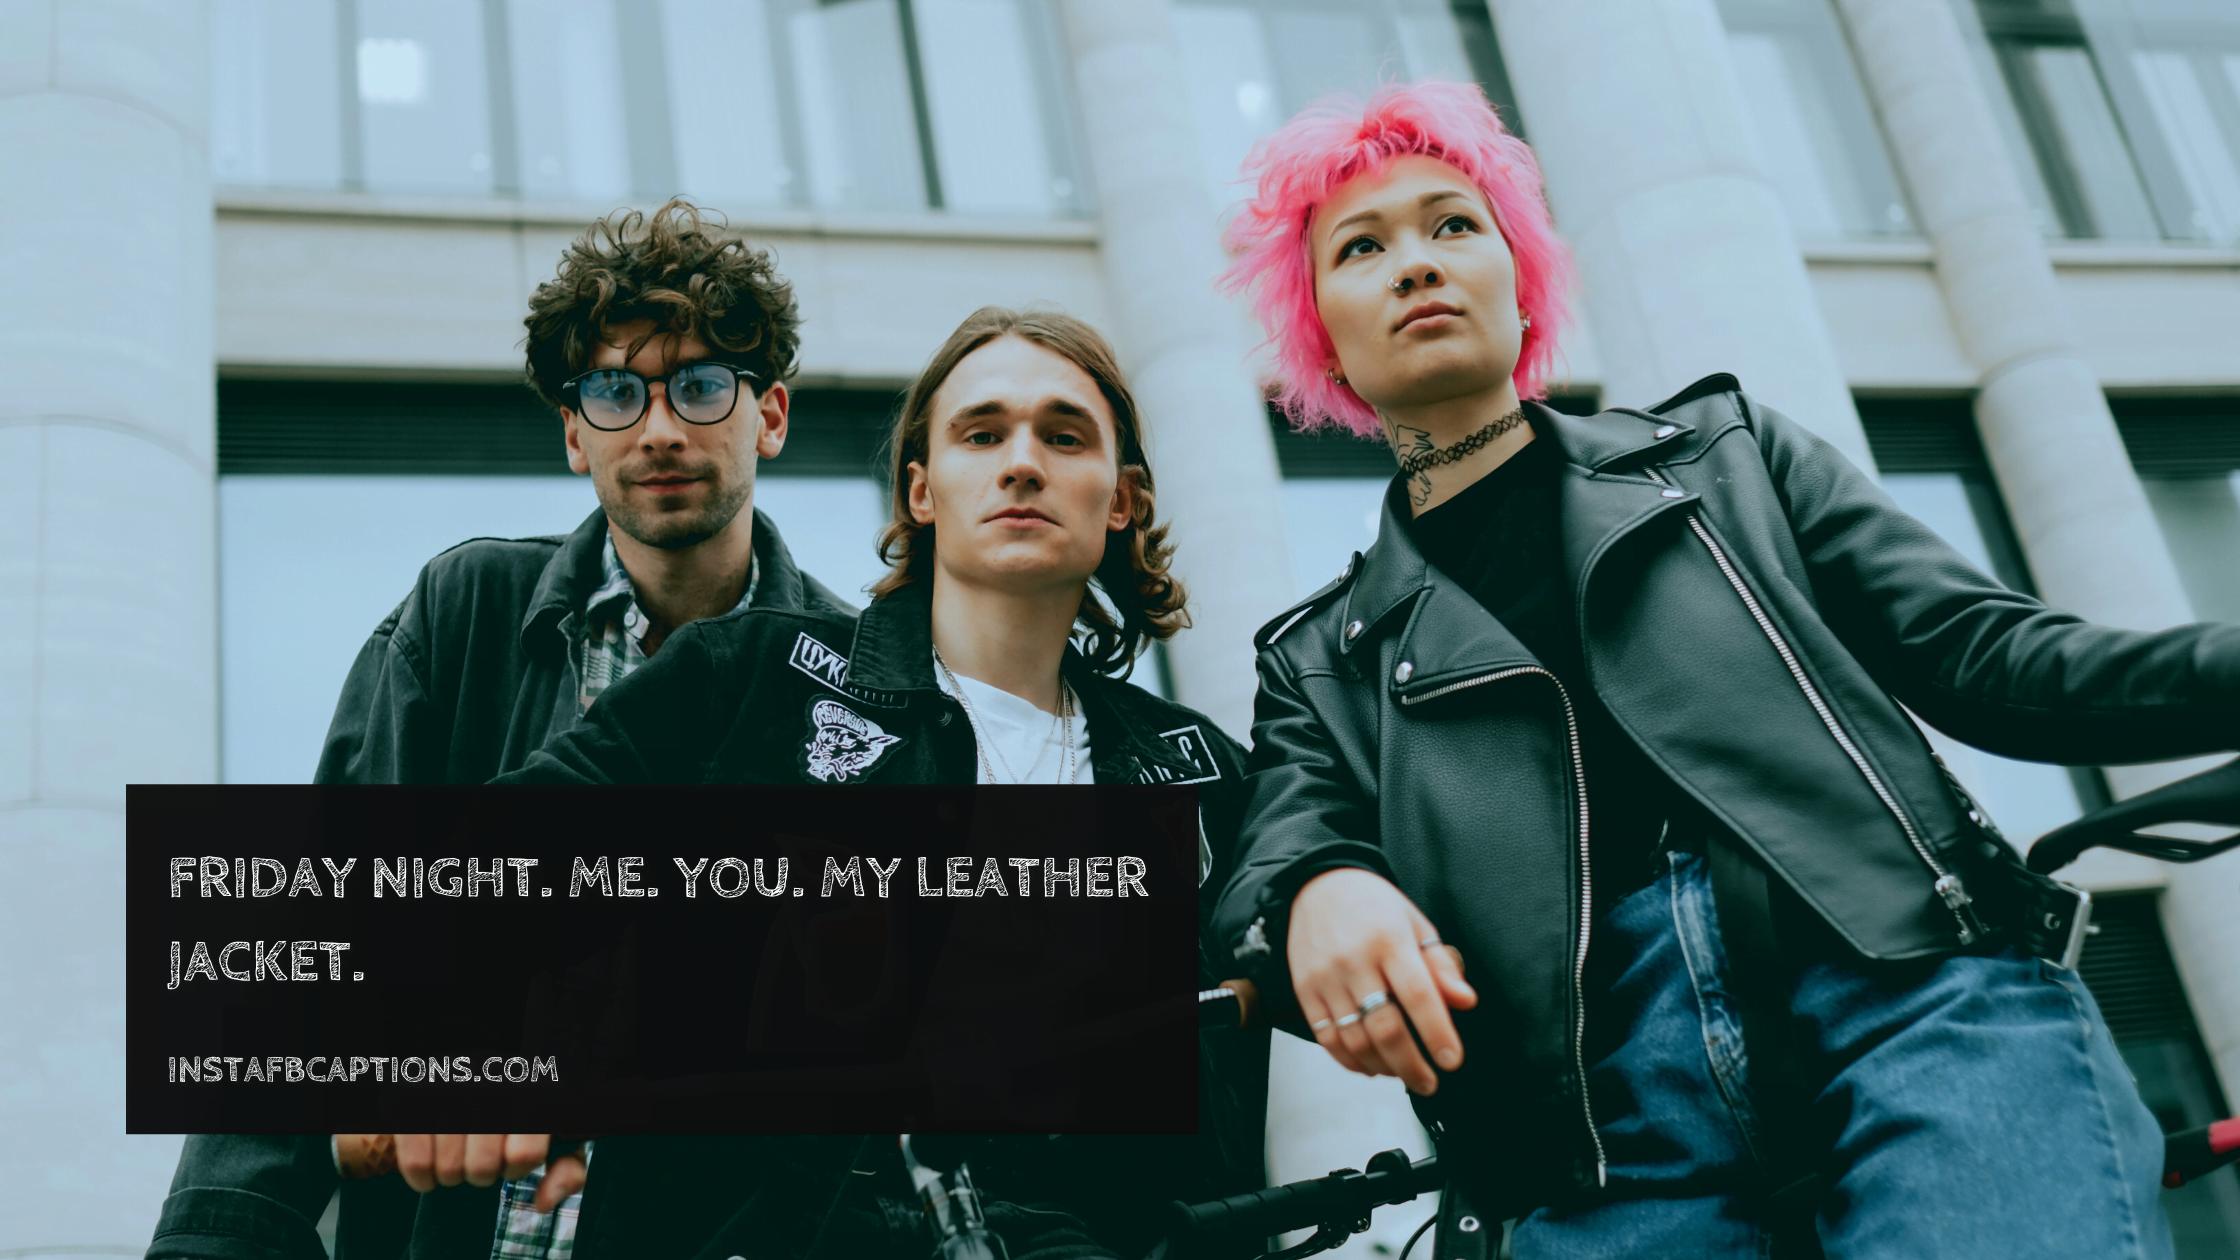 Cool Leather Jacket Captions  - Cool Leather Jacket Captions  - Leather Jacket Love: Instagram Caption Inspiration